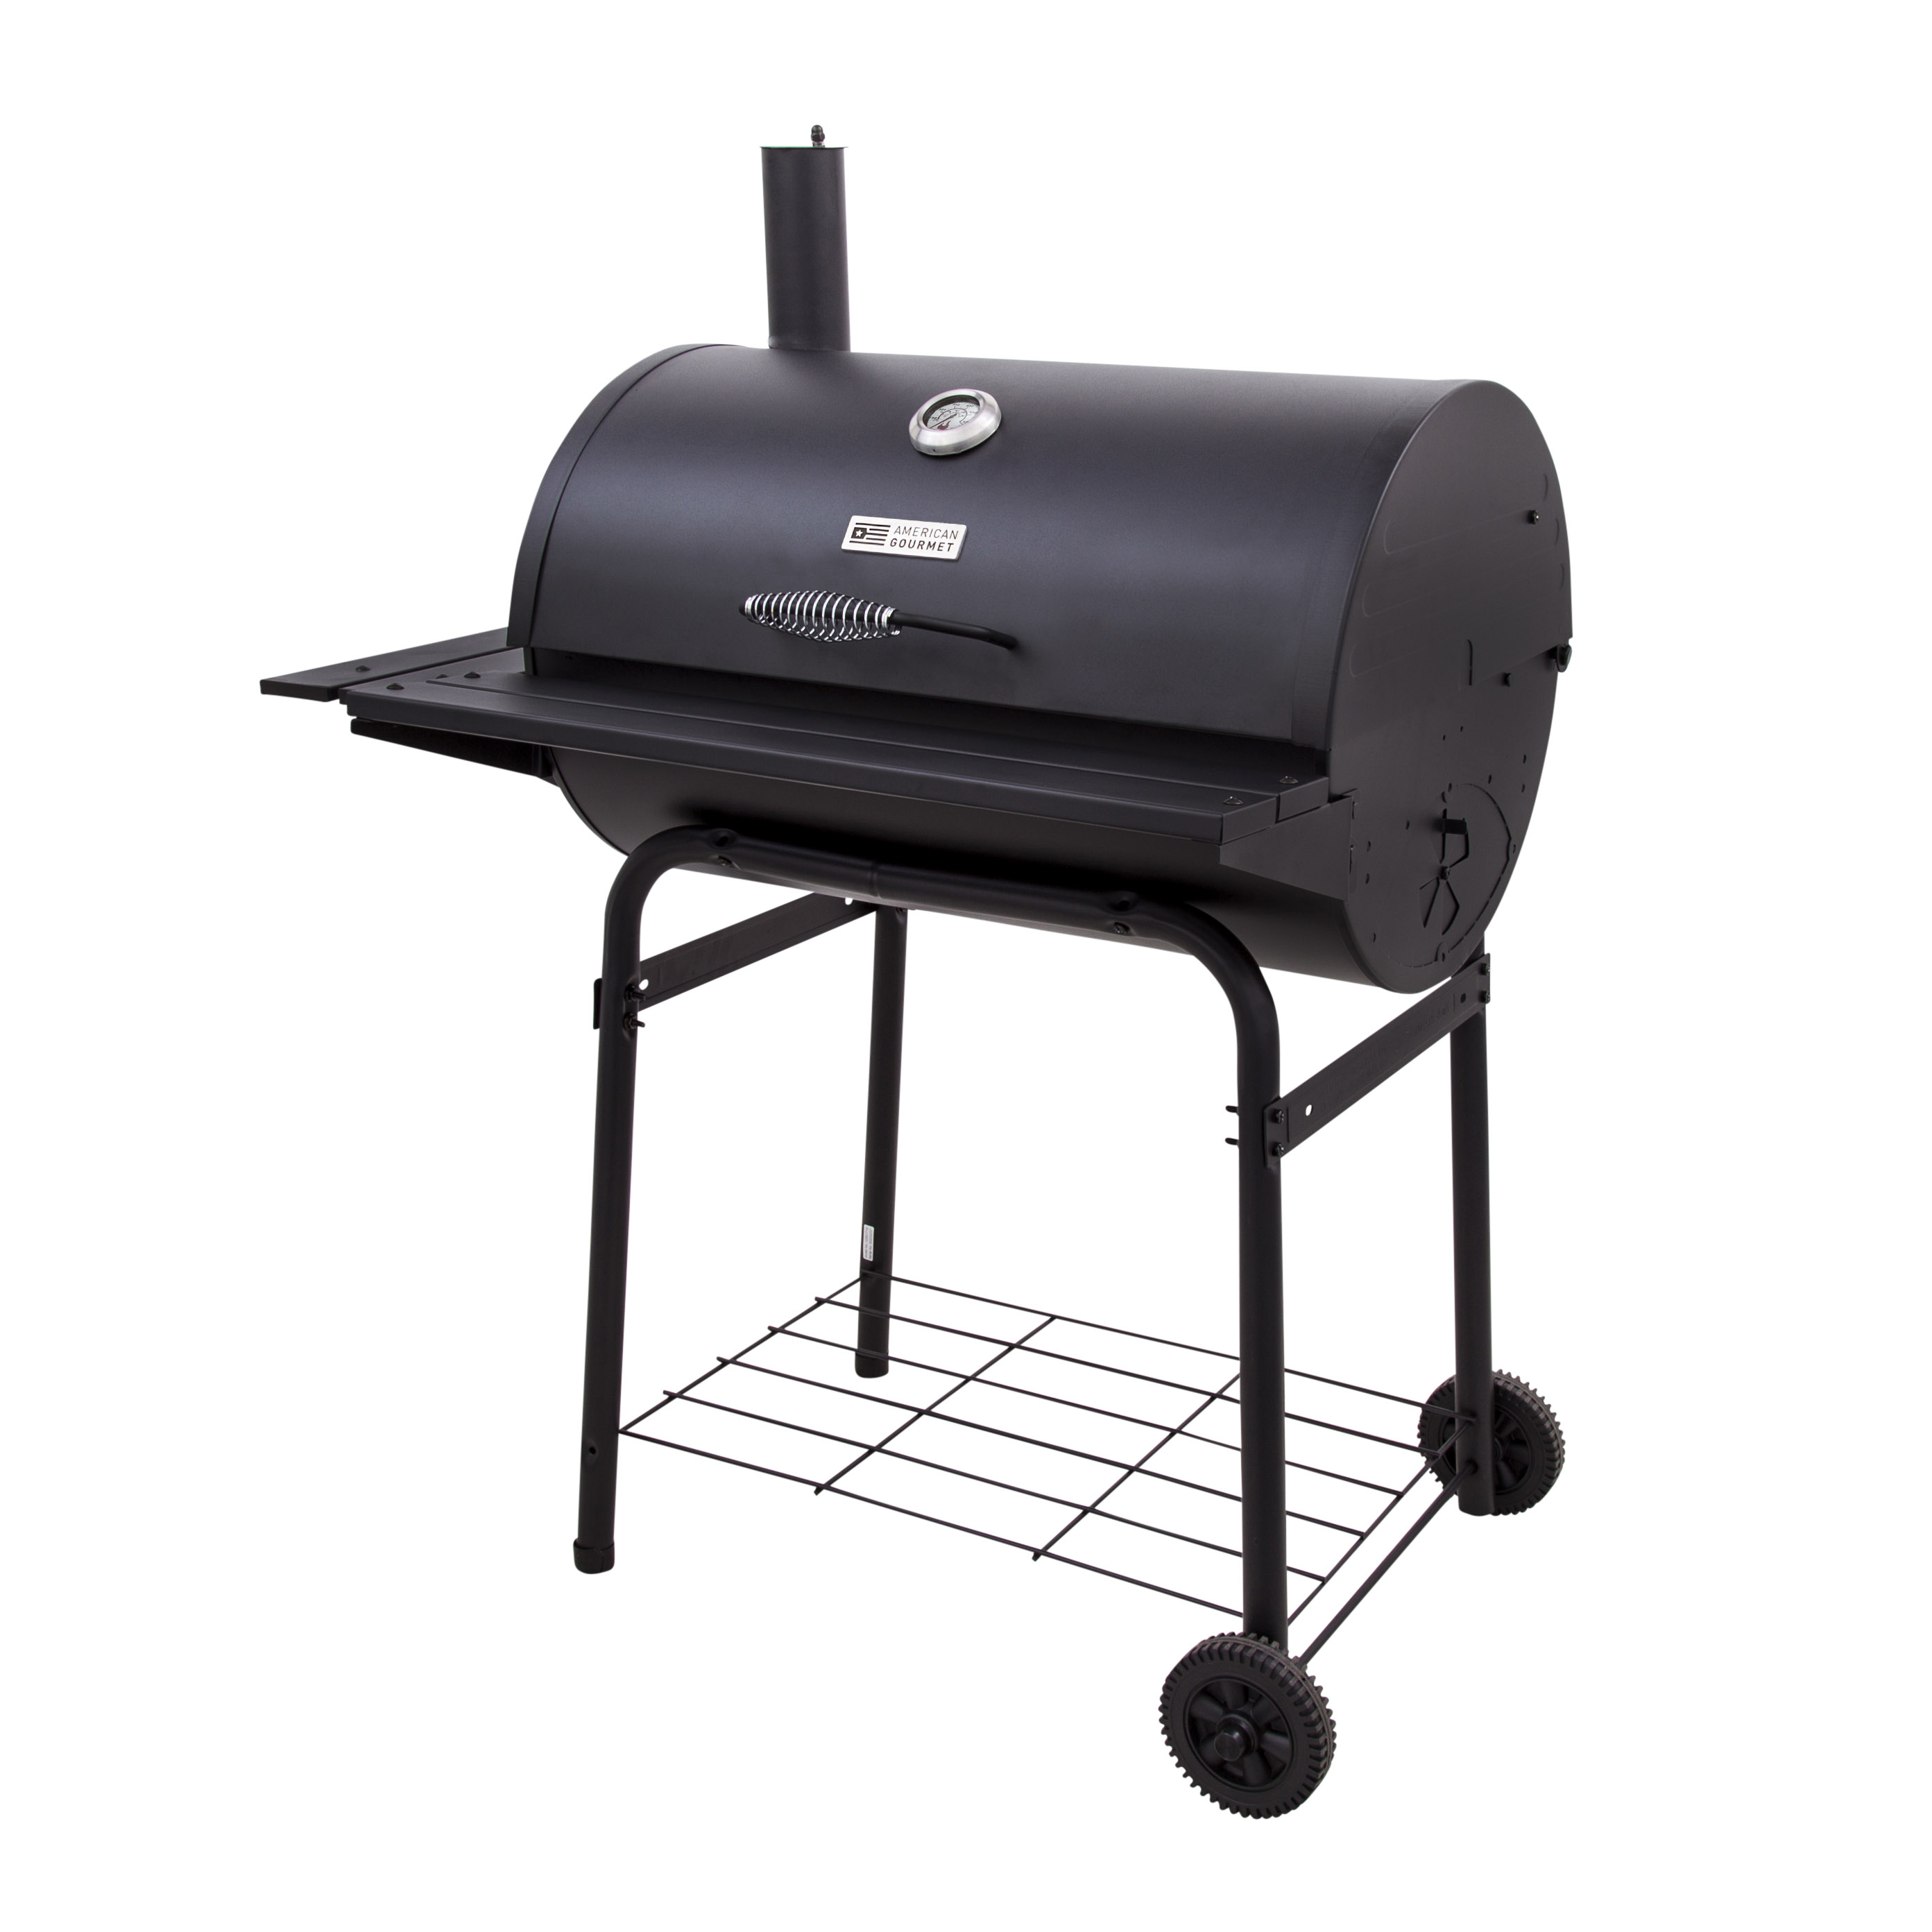 American Gourmet by Char-Broil 840 sq in Charcoal Barrel Outdoor Grill - image 3 of 9